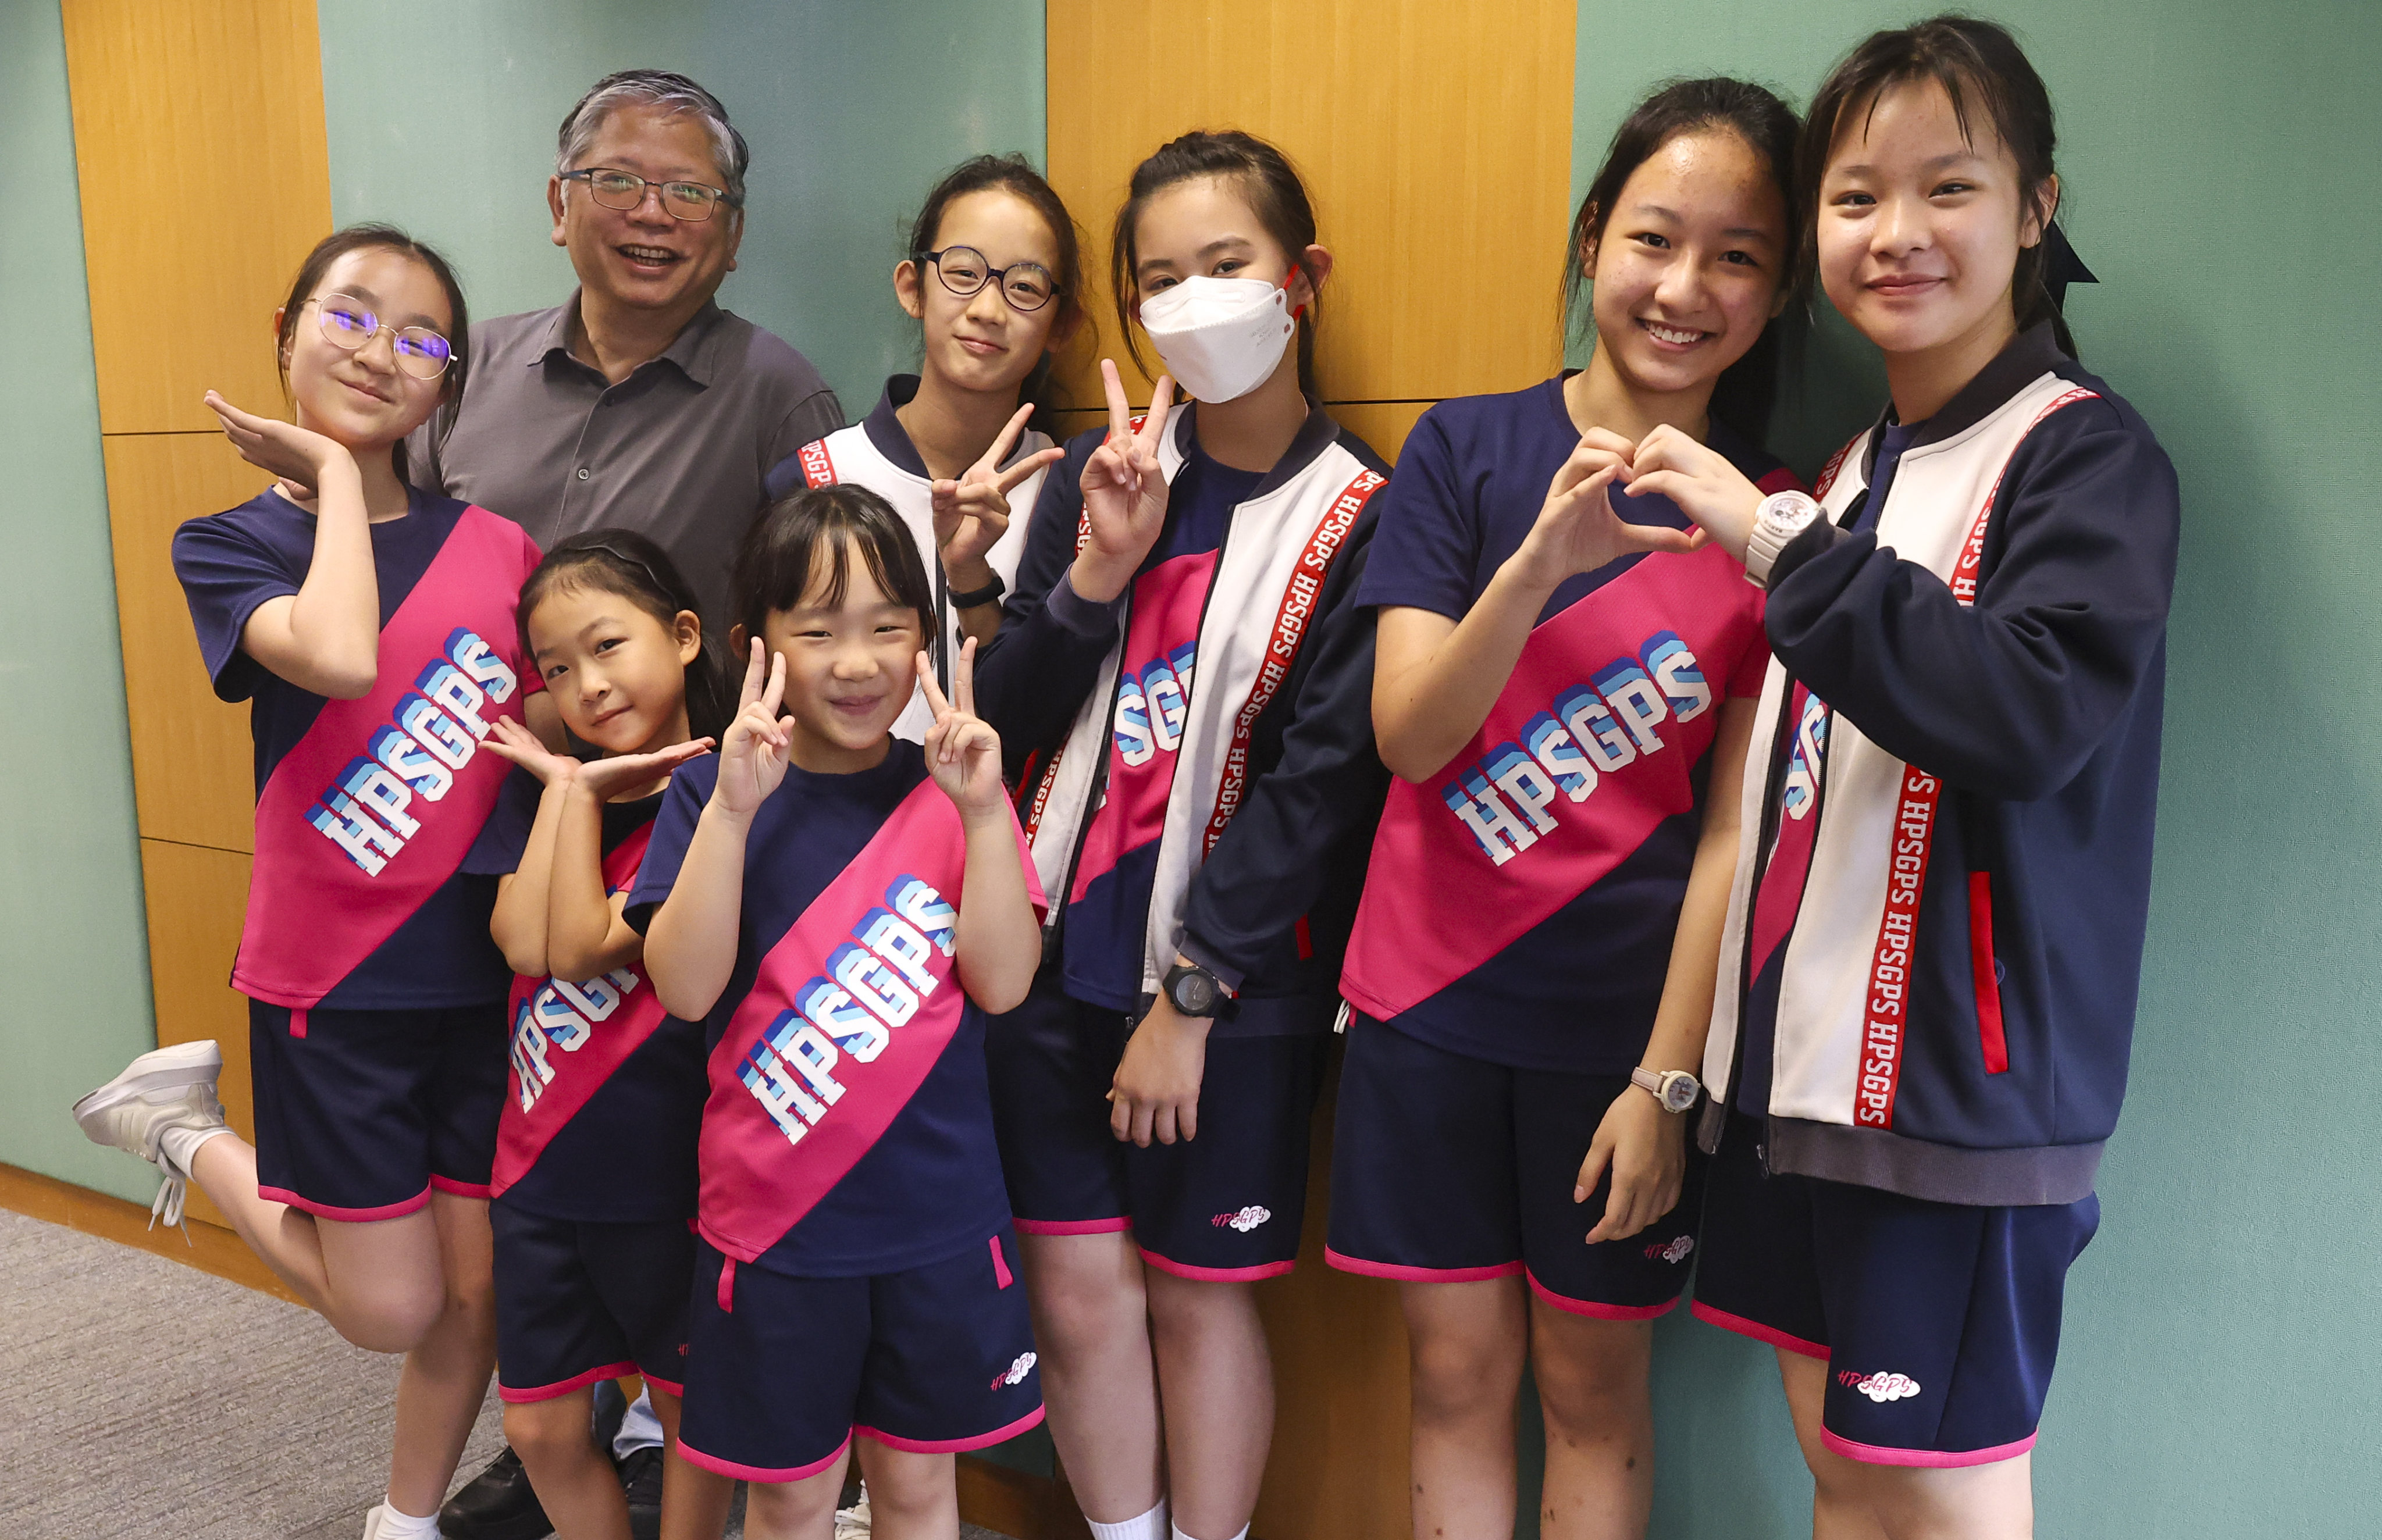 Members of Campus Reporter Team B pose for a photo at Hoi Pa Street Government Primary School in Tsuen Wan. (Back Row, L to R) Charlotte Ng Cheuk-ling; Wan Cho-Leung, Unit-in-charge of the HKFYG; Kacie Leung Ka-chun; Miracle Ko Ka-mei; Angel Wong Tsz-ying; Athena Lan Zi-Qing (Front Row ,L to R) Jessie Lau Kai-yan and Hailey Chiu Wing-tung. Photo: Edmond So